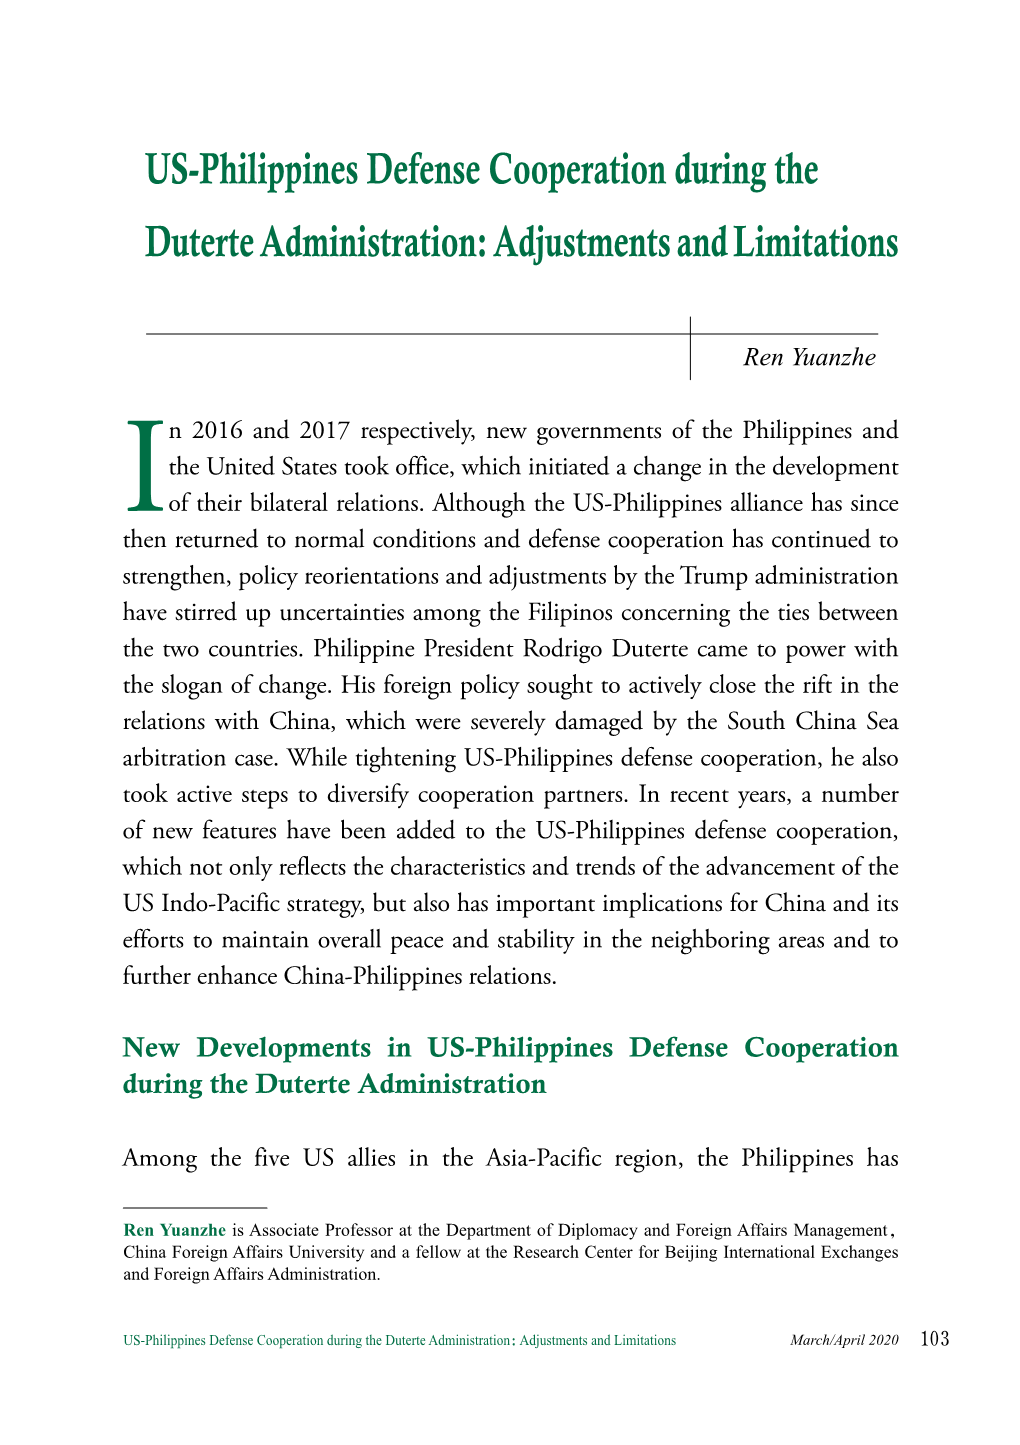 US-Philippines Defense Cooperation During the Duterte Administration: Adjustments and Limitations